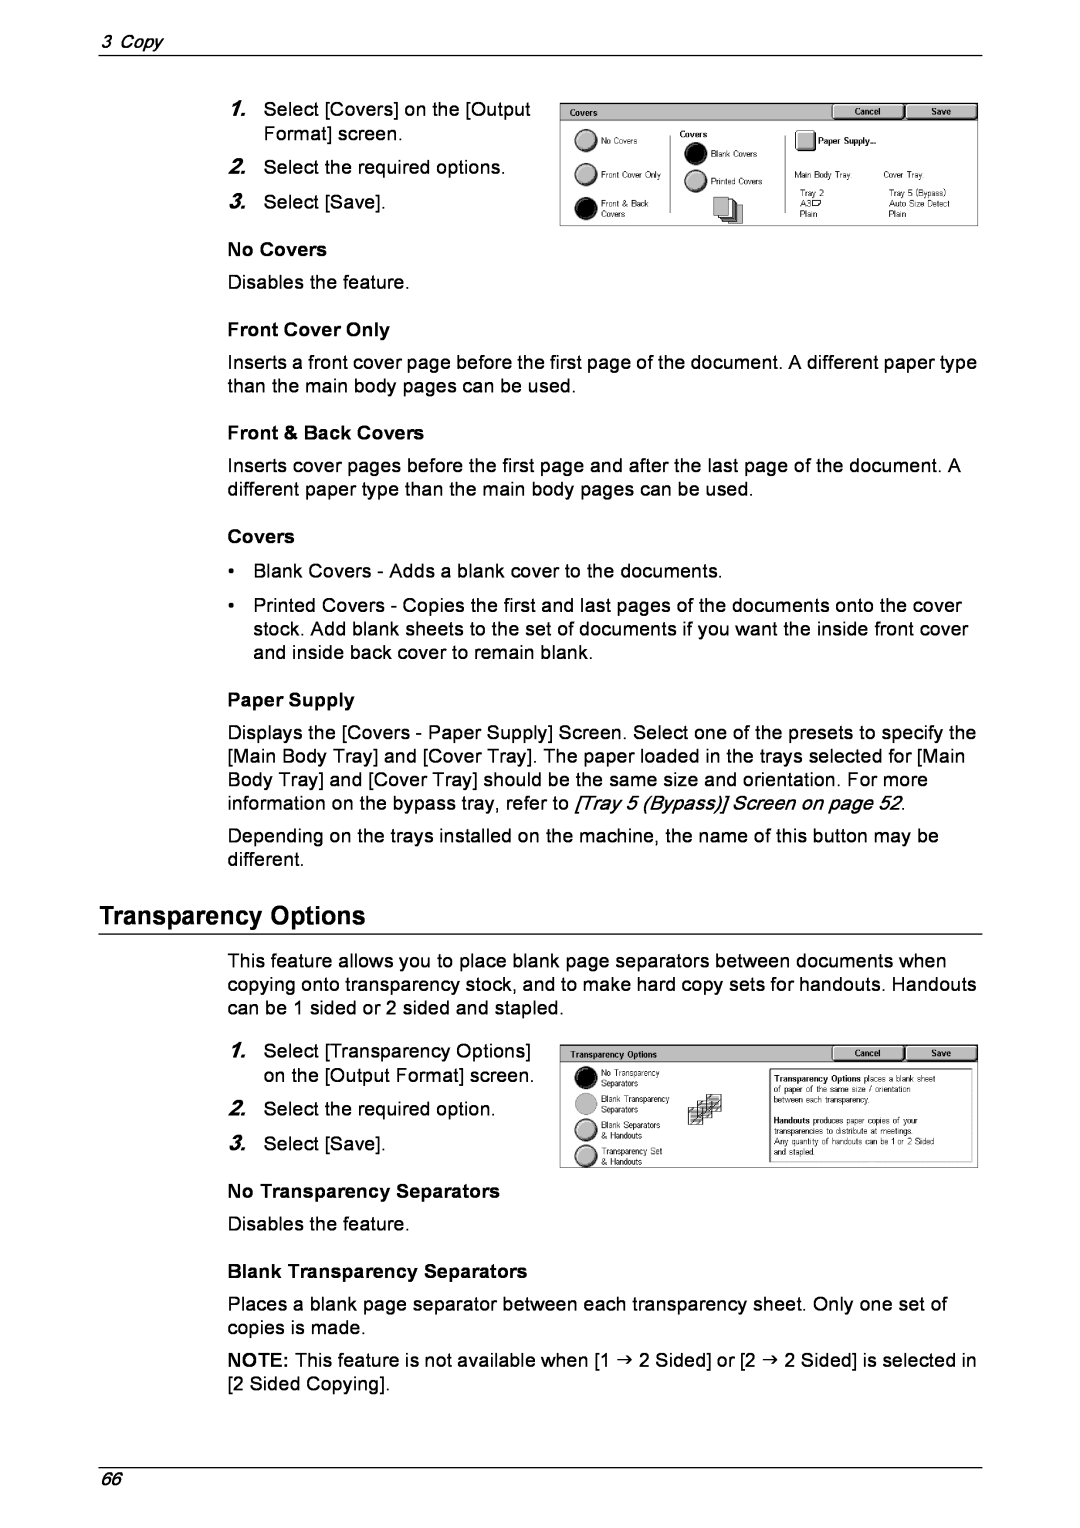 Xerox 5230 manual Transparency Options, No Covers, Front Cover Only, Front & Back Covers, No Transparency Separators 